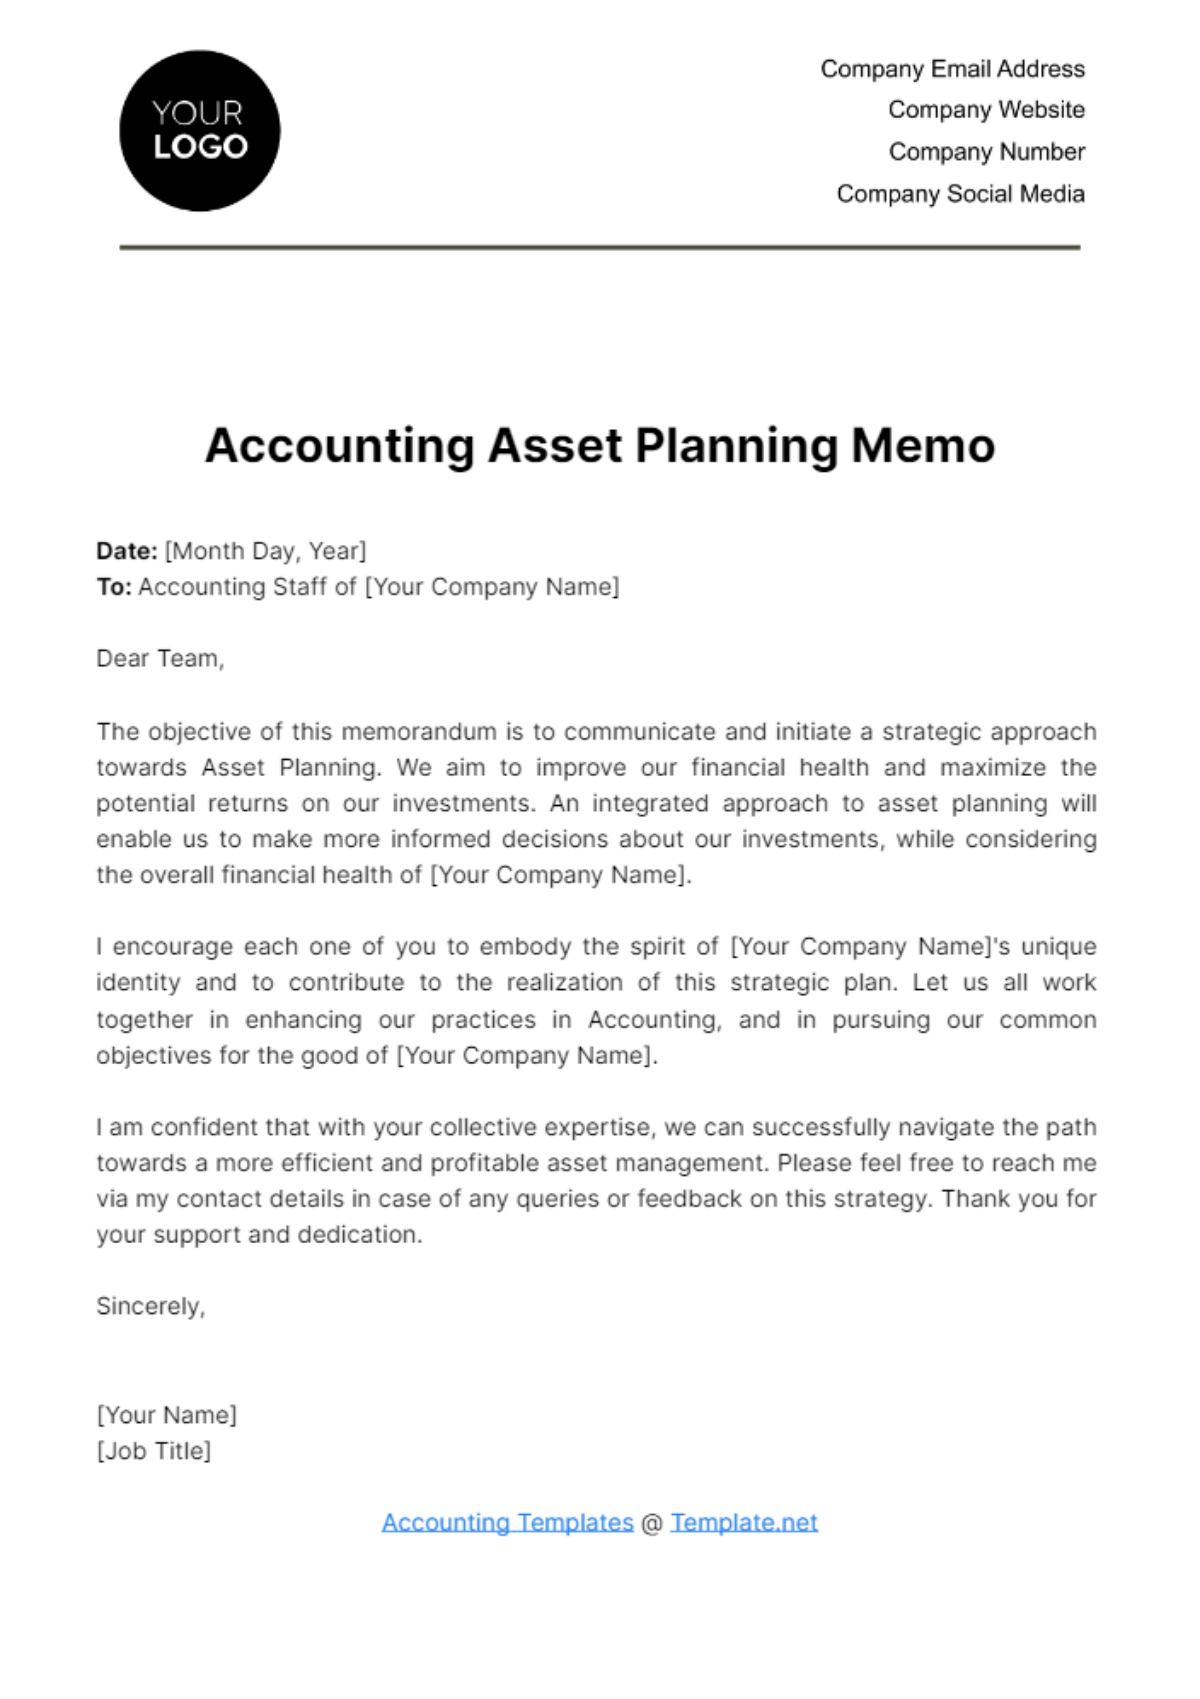 Free Accounting Asset Planning Memo Template